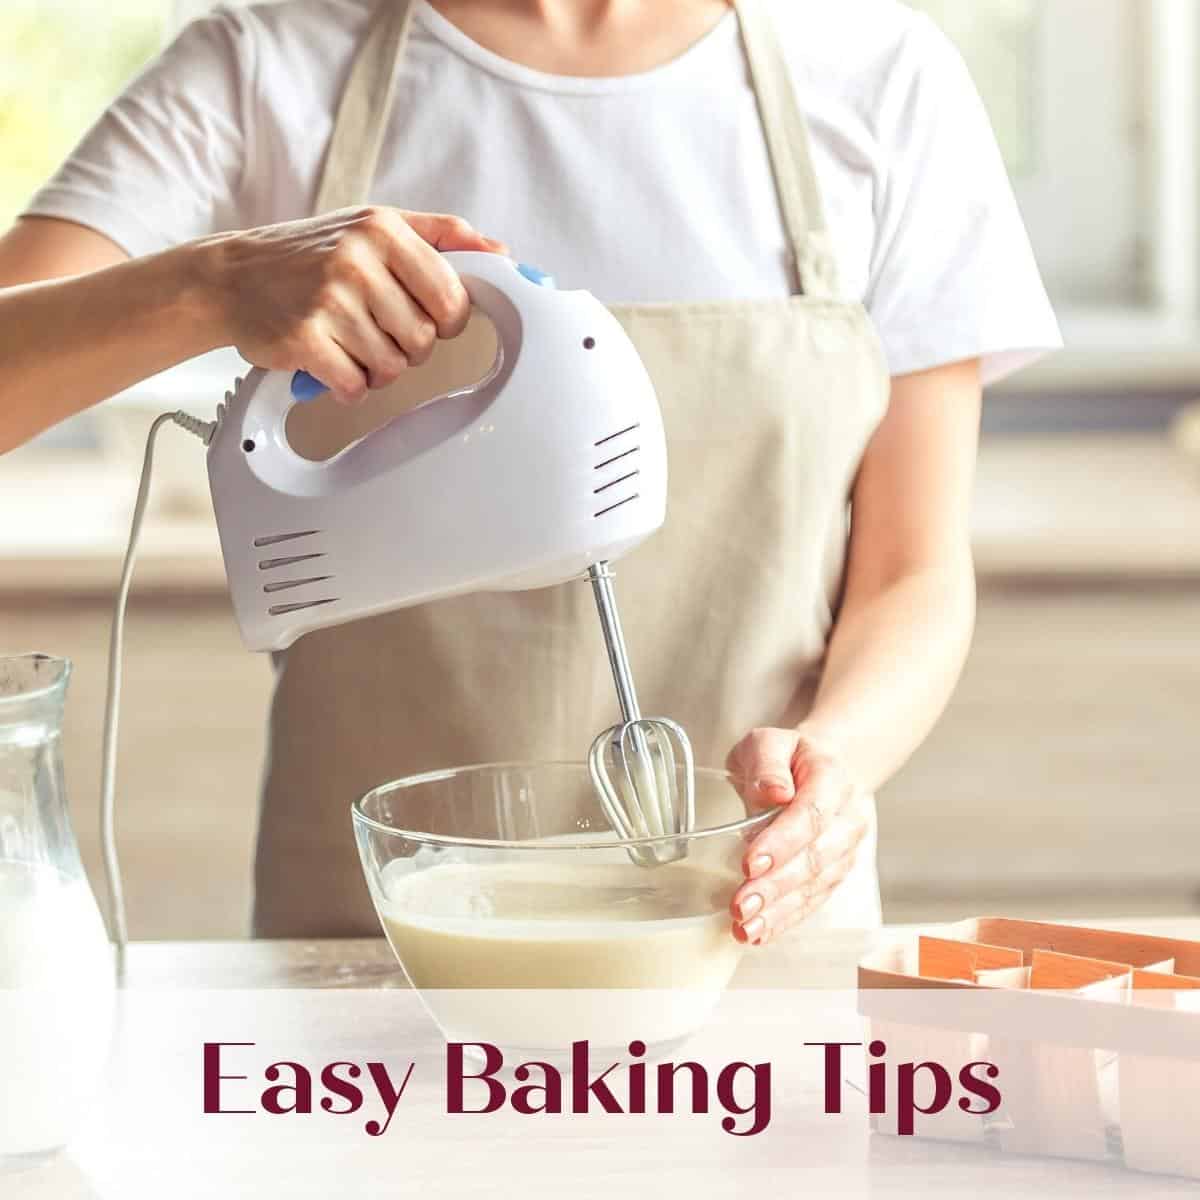 Easy baking tip category graphic with woman holding a mixer.